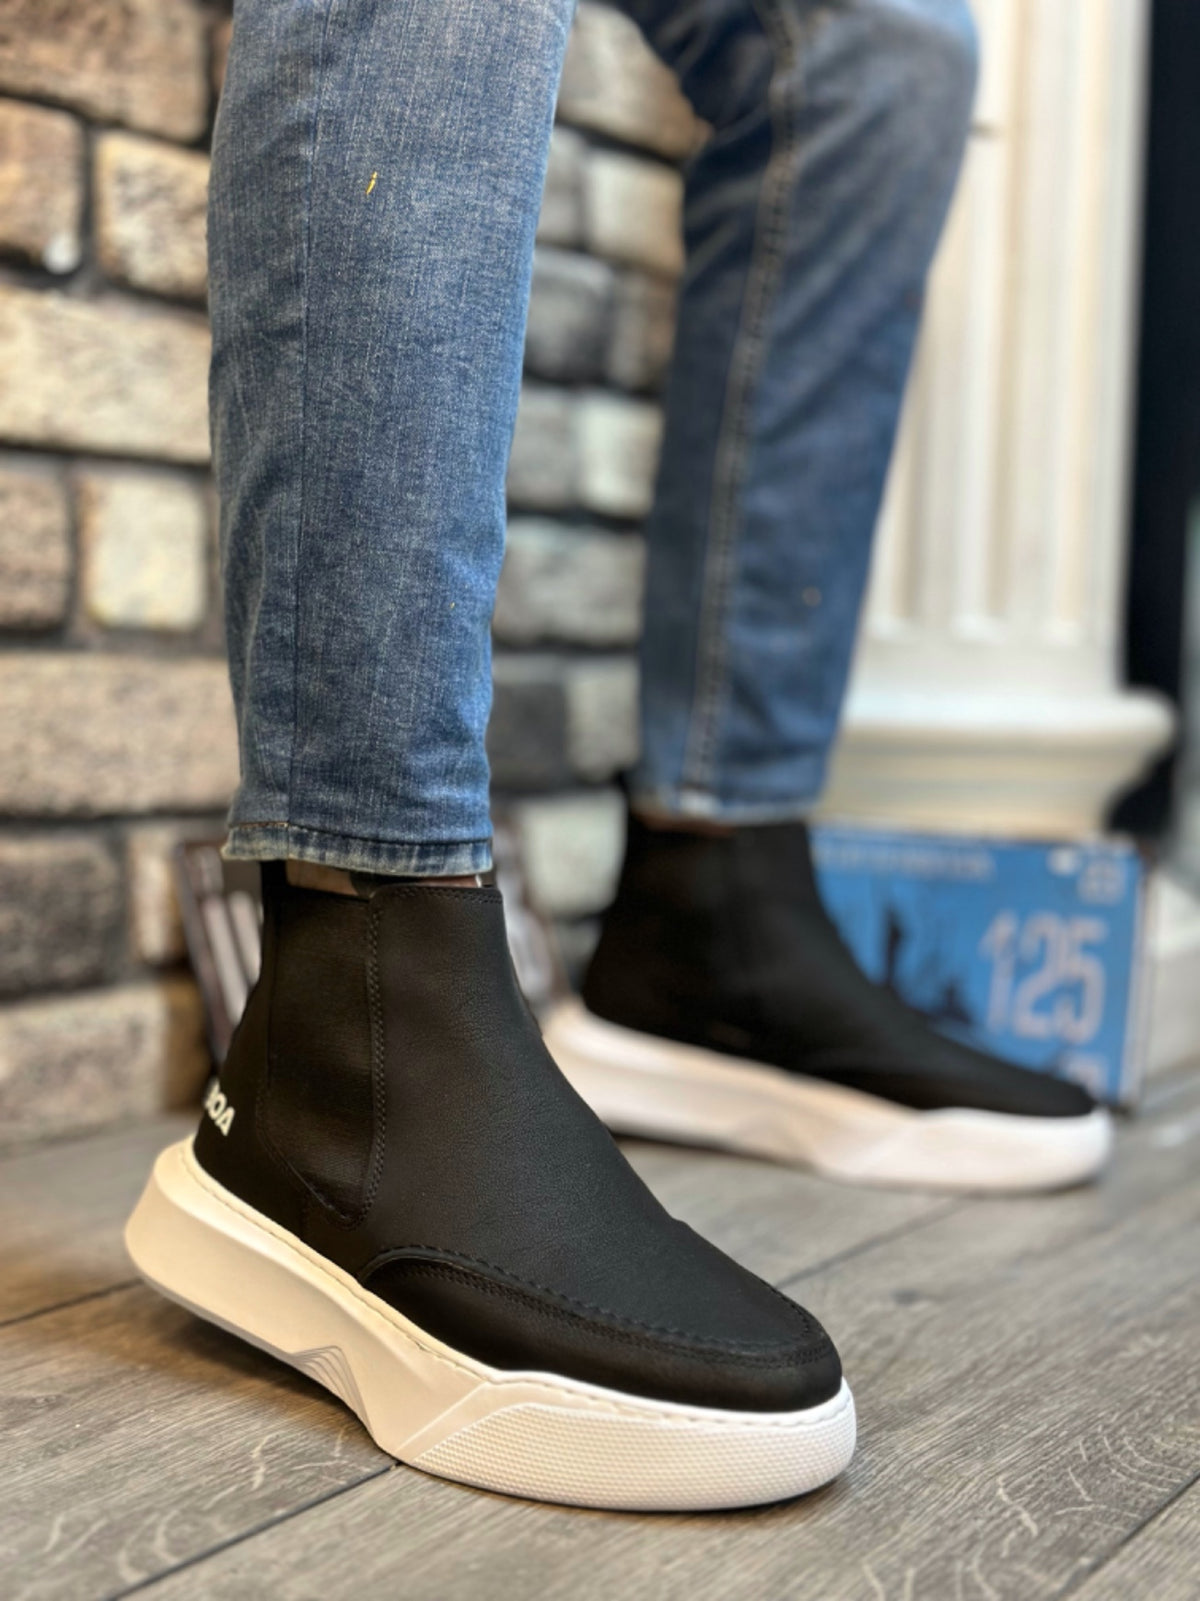 BA0150 Laceless Men's High Sole Skin Black White Sports Boots - STREETMODE ™